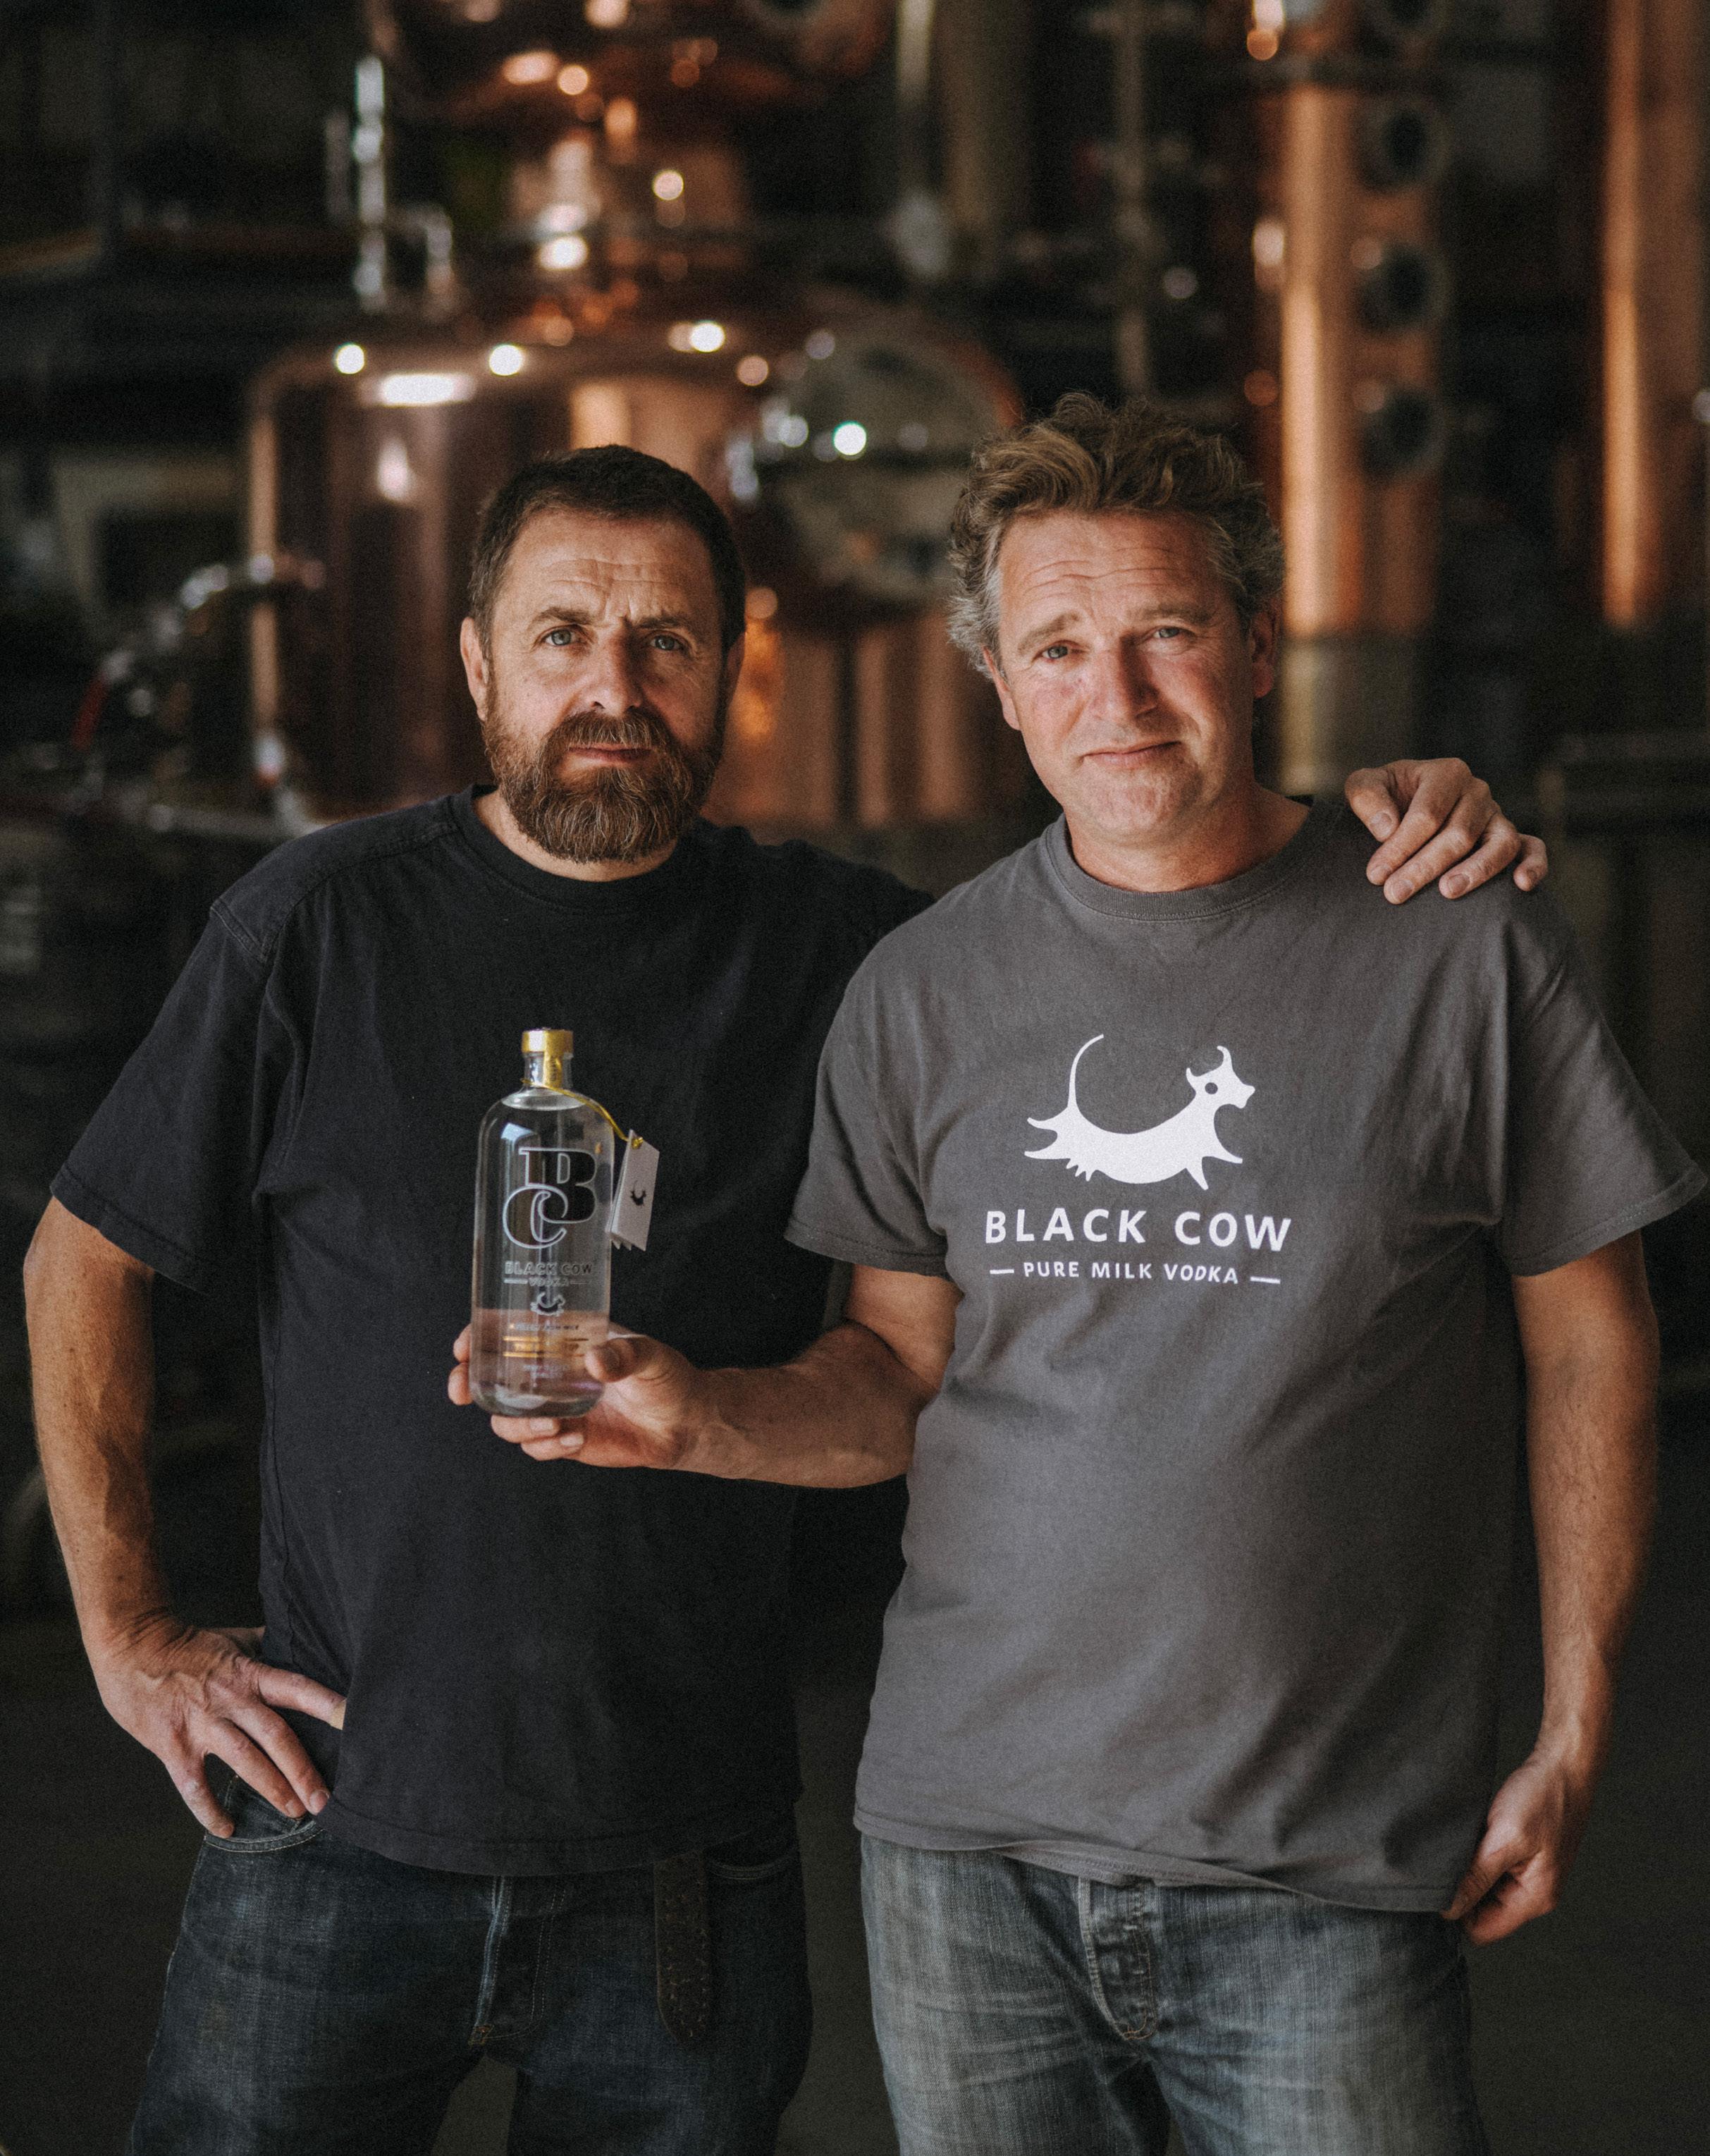 Read article: MEET THE MAKERS OF THE WORLDS FIRST PURE MILK VODKA